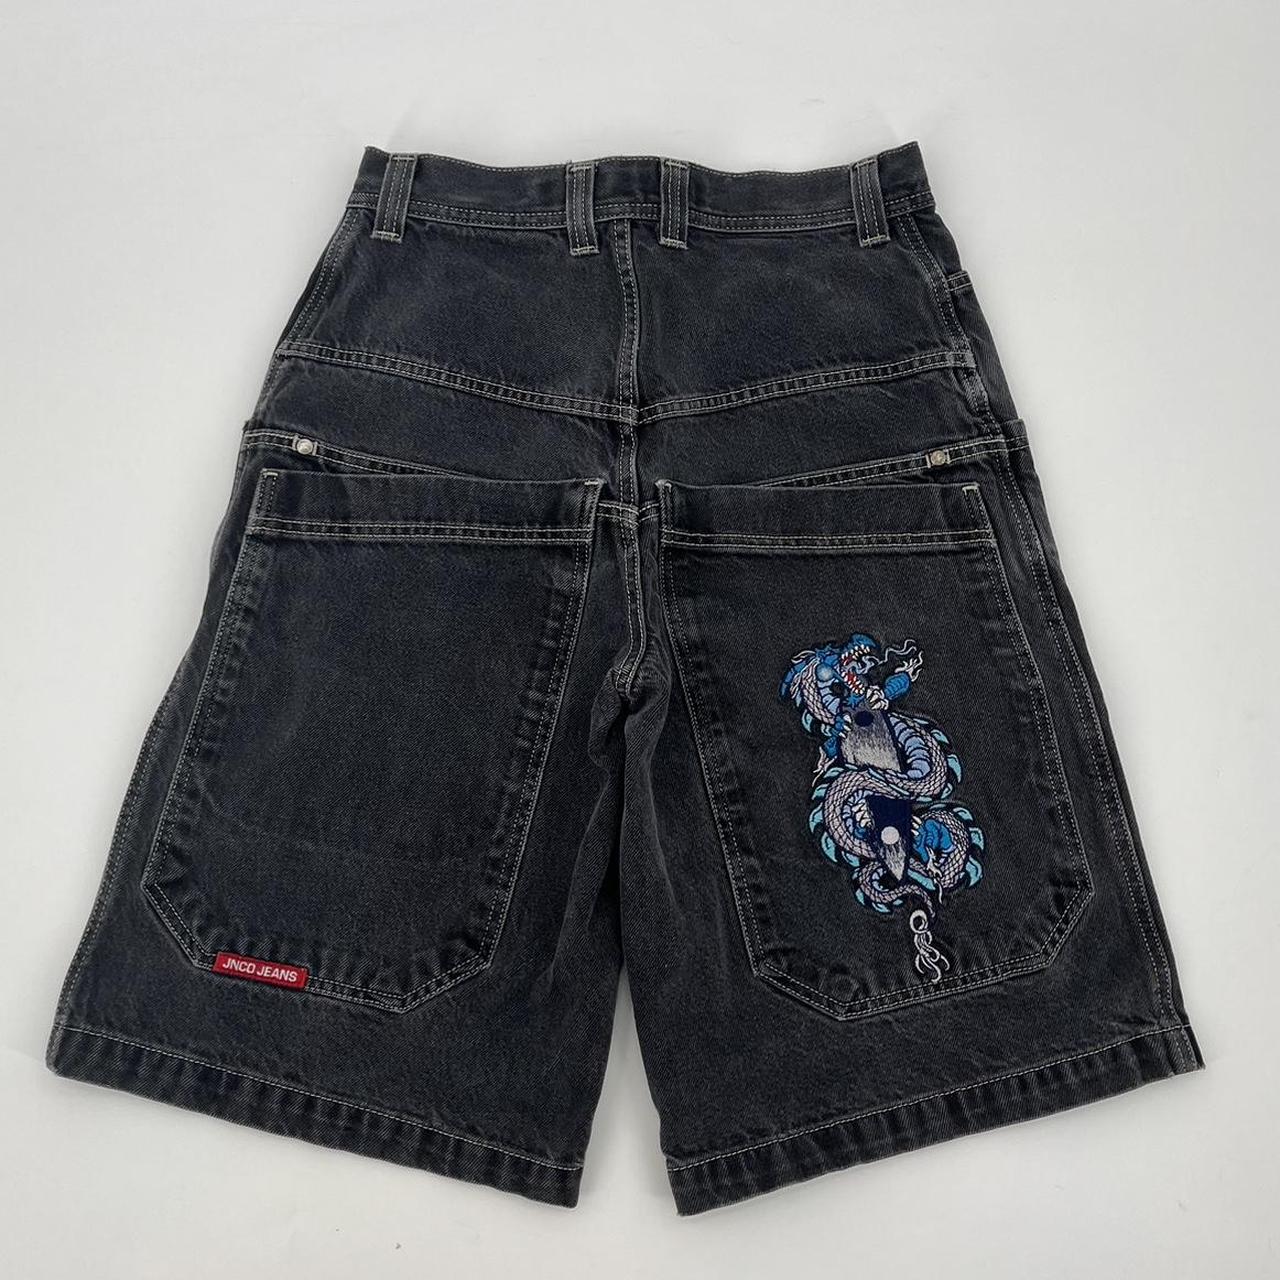 Black Dragon Jnco Jeans Shorts DO NOT BUY Tagged... - Depop